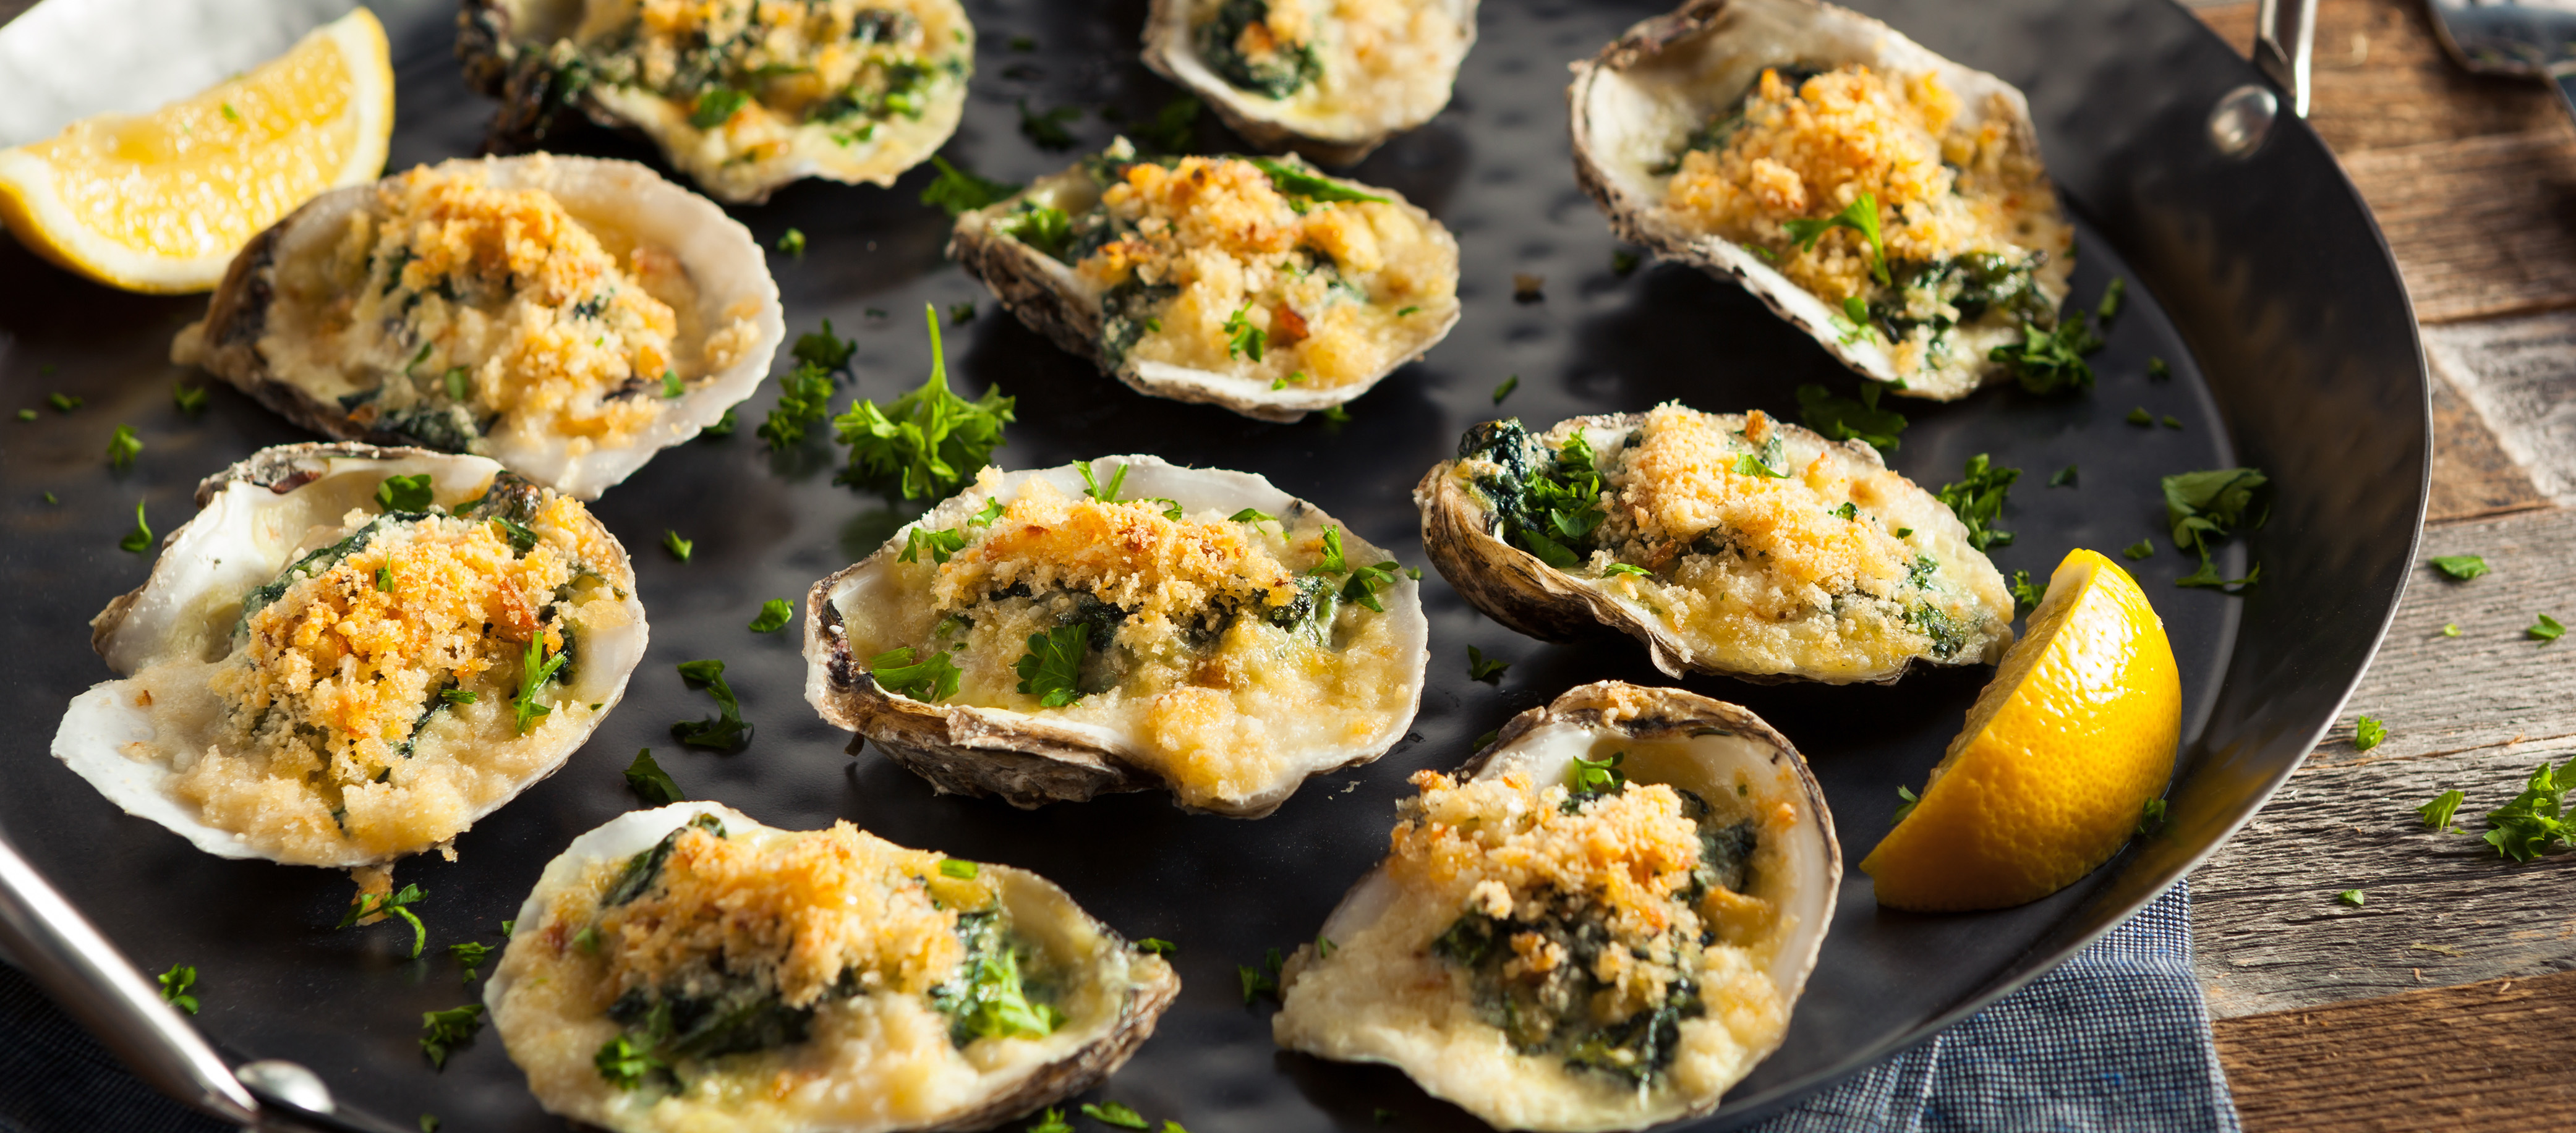 Image of Garlic Parmesan Grilled Oysters